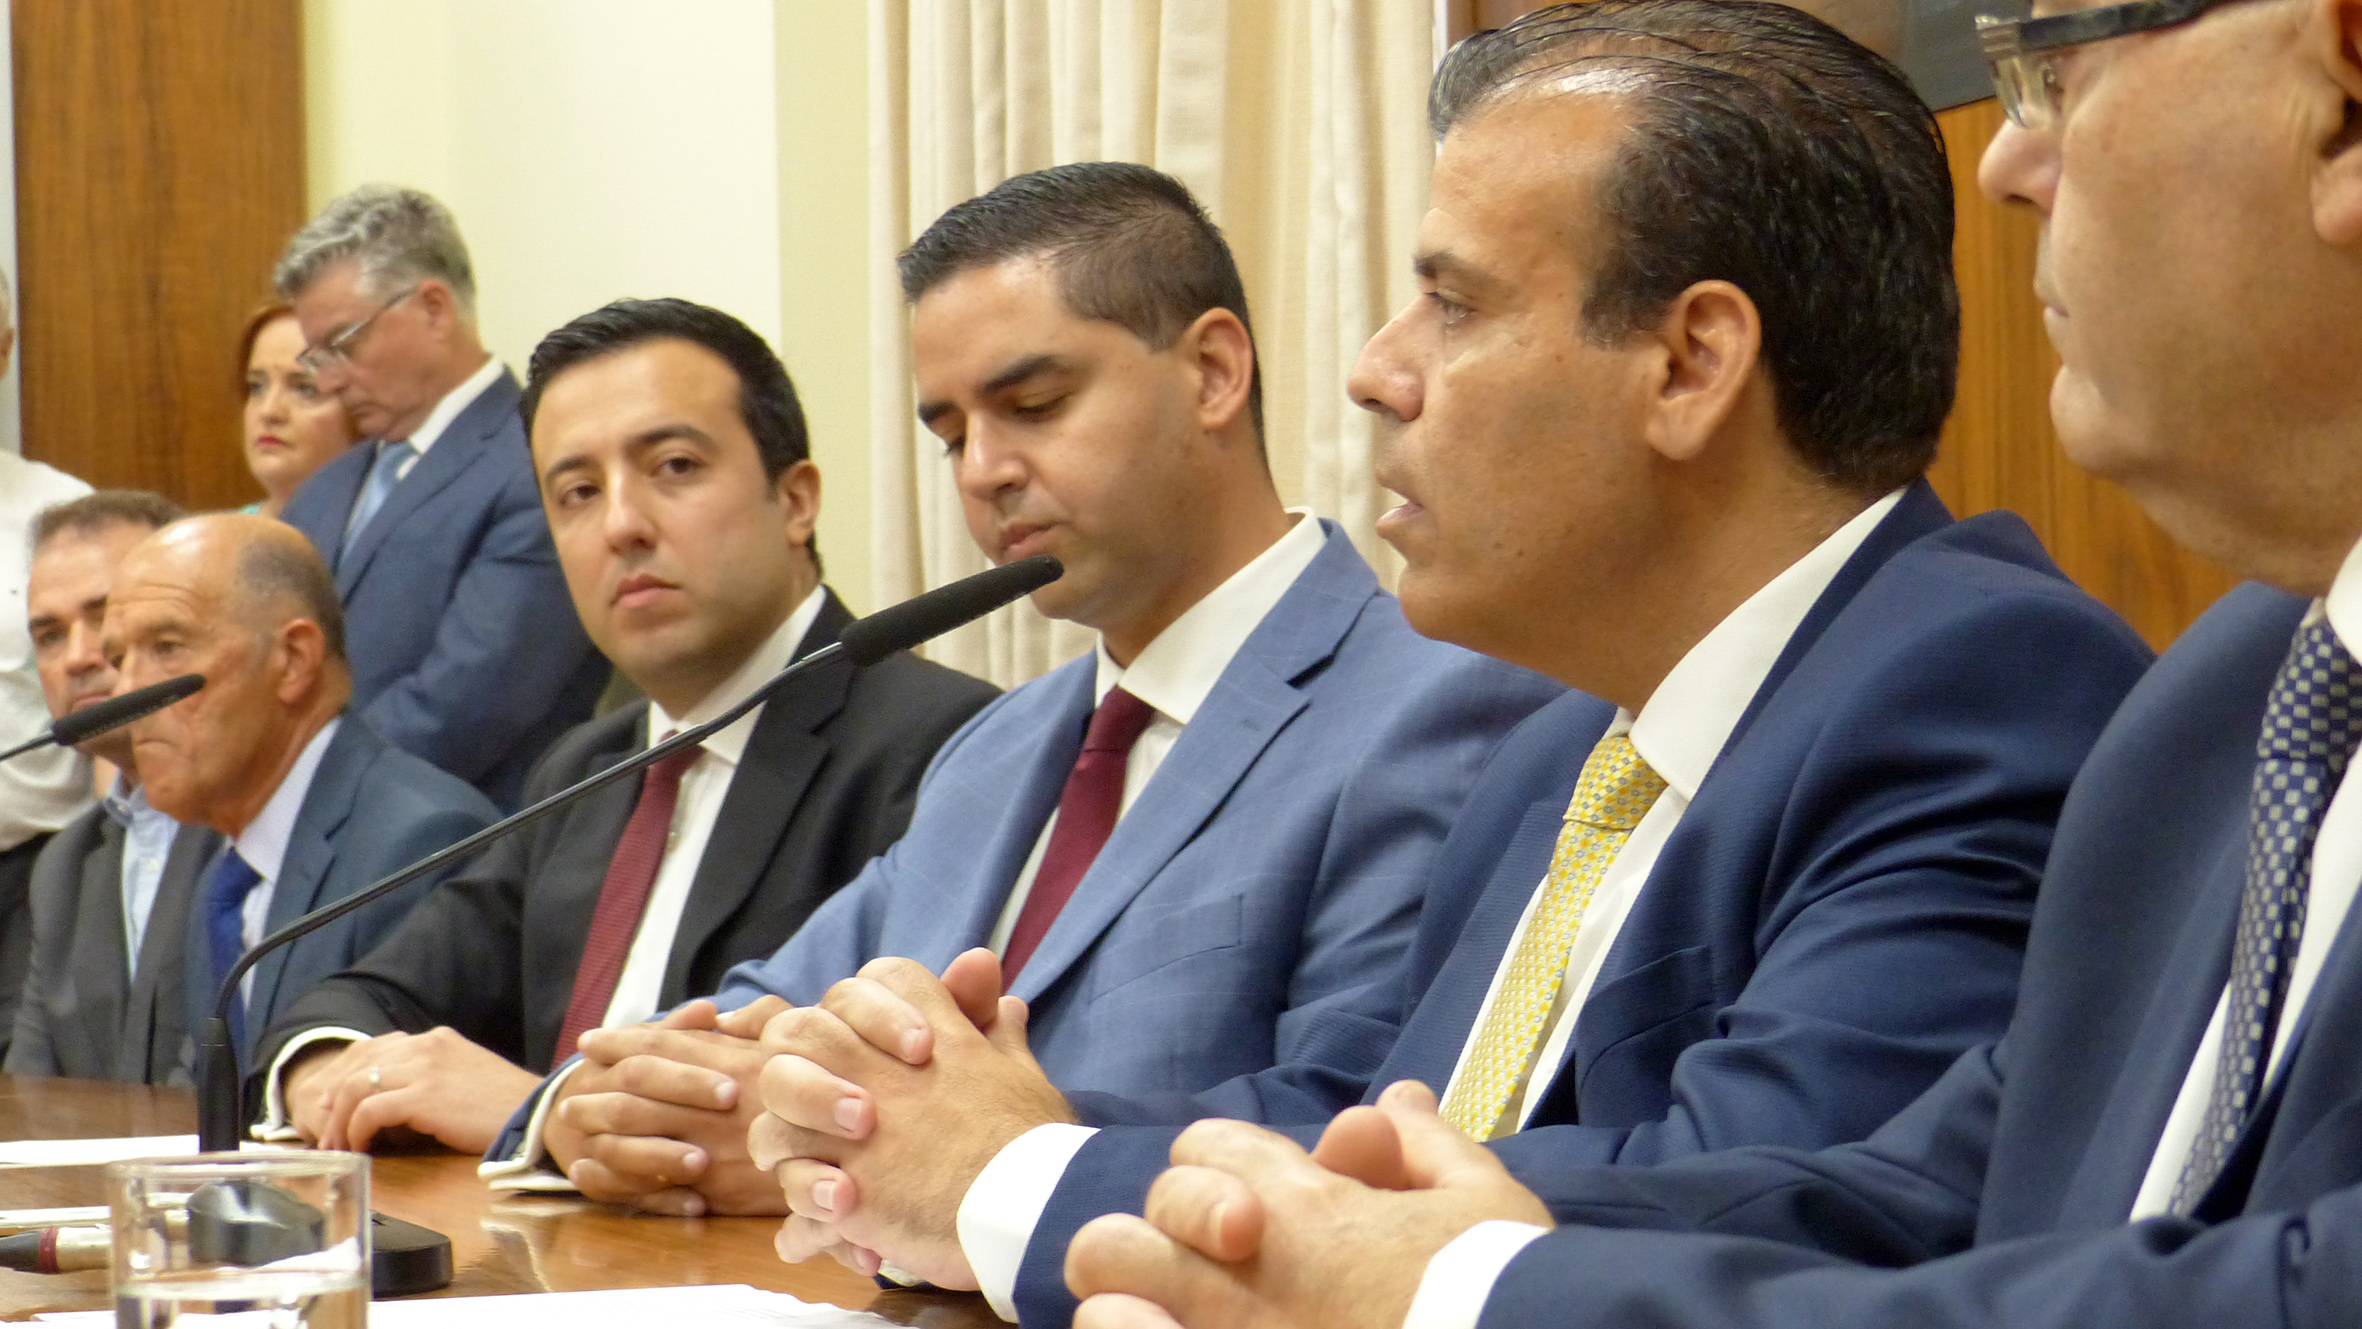 Four bidders in the running for Malta Gozo Tunnel Project